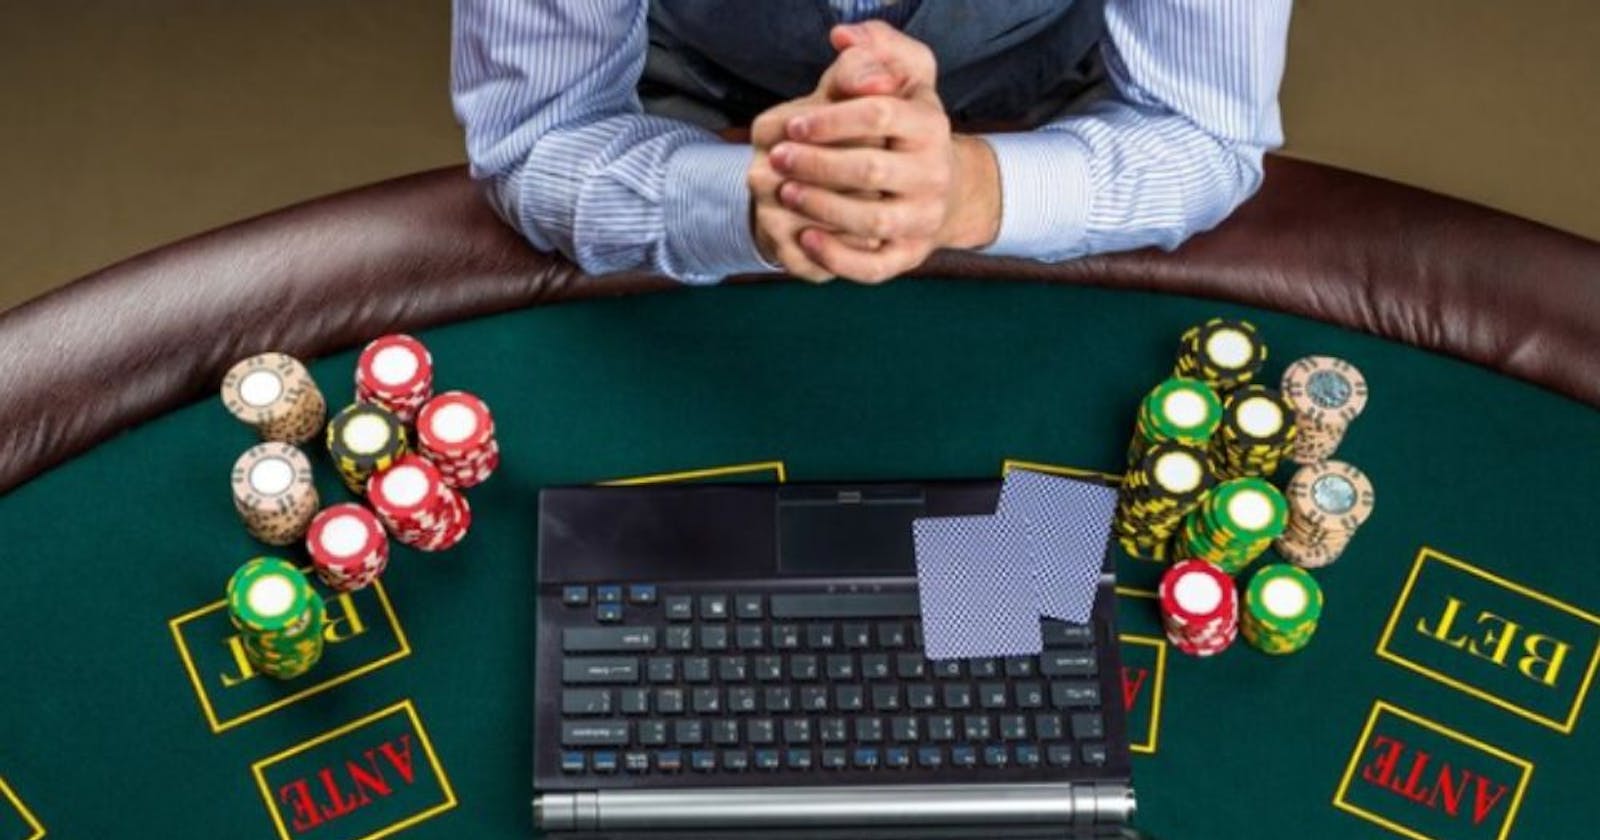 Top 10 Essential Steps to Start Online Poker Business